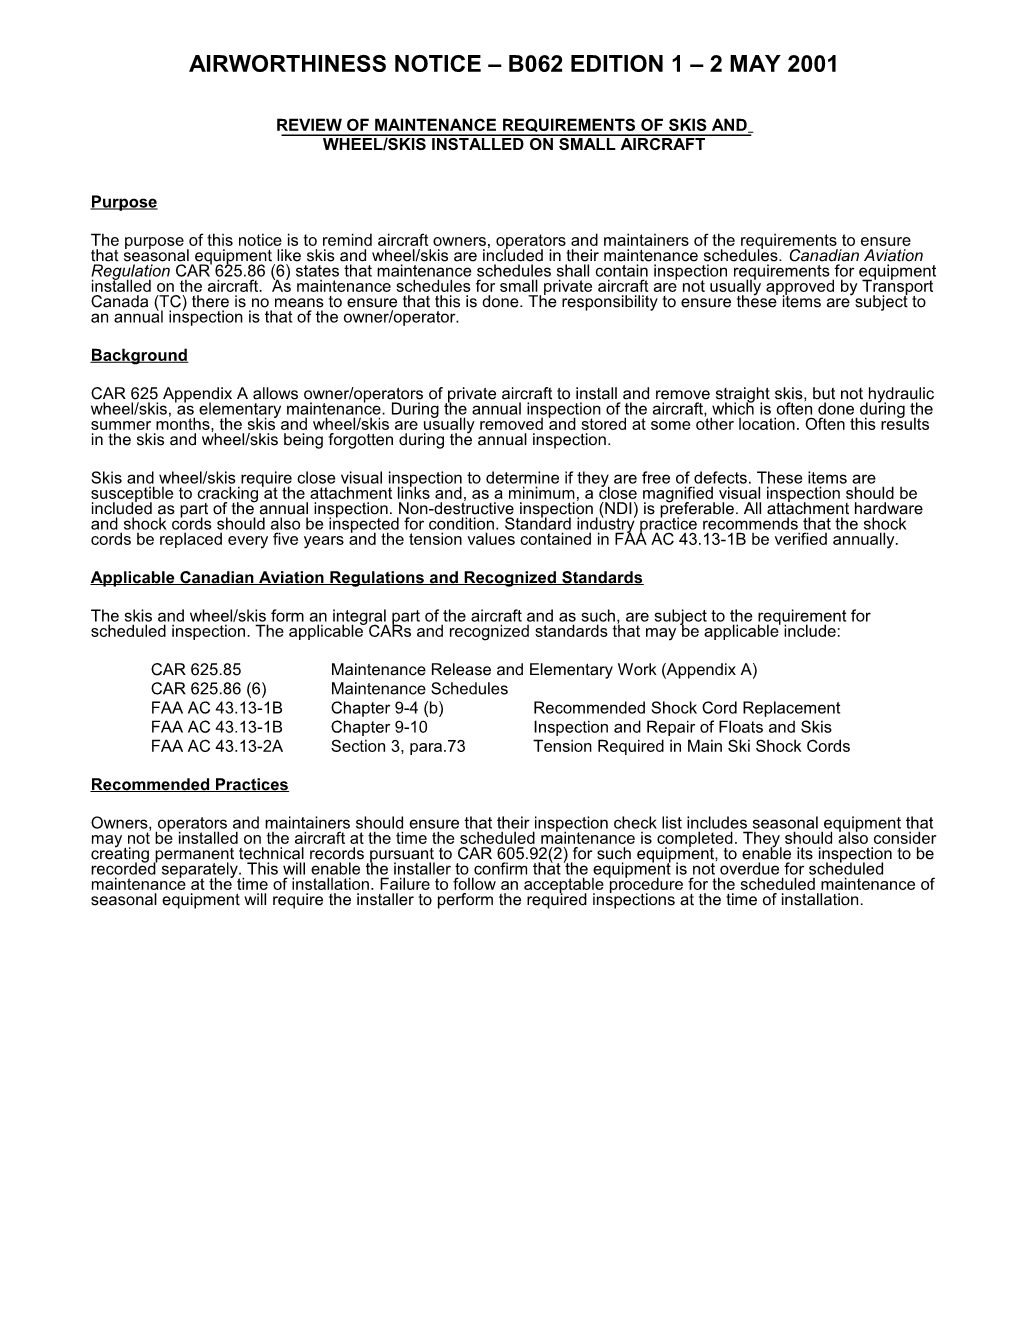 Airworthiness Notice B062 Edition 1 2 May 2001